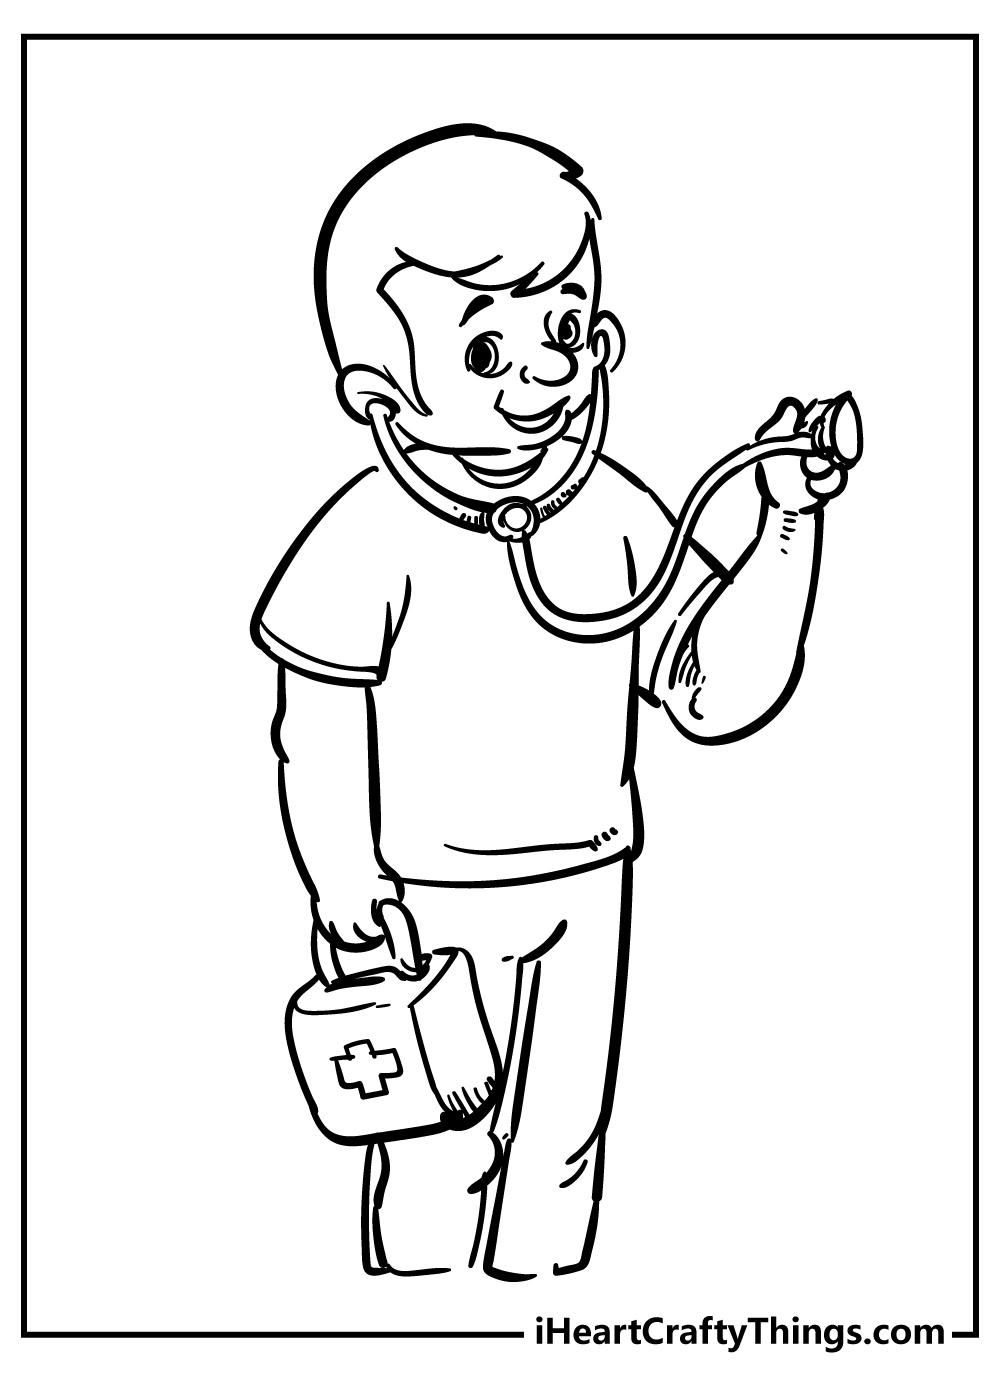 Doctor Coloring Sheet for children free download